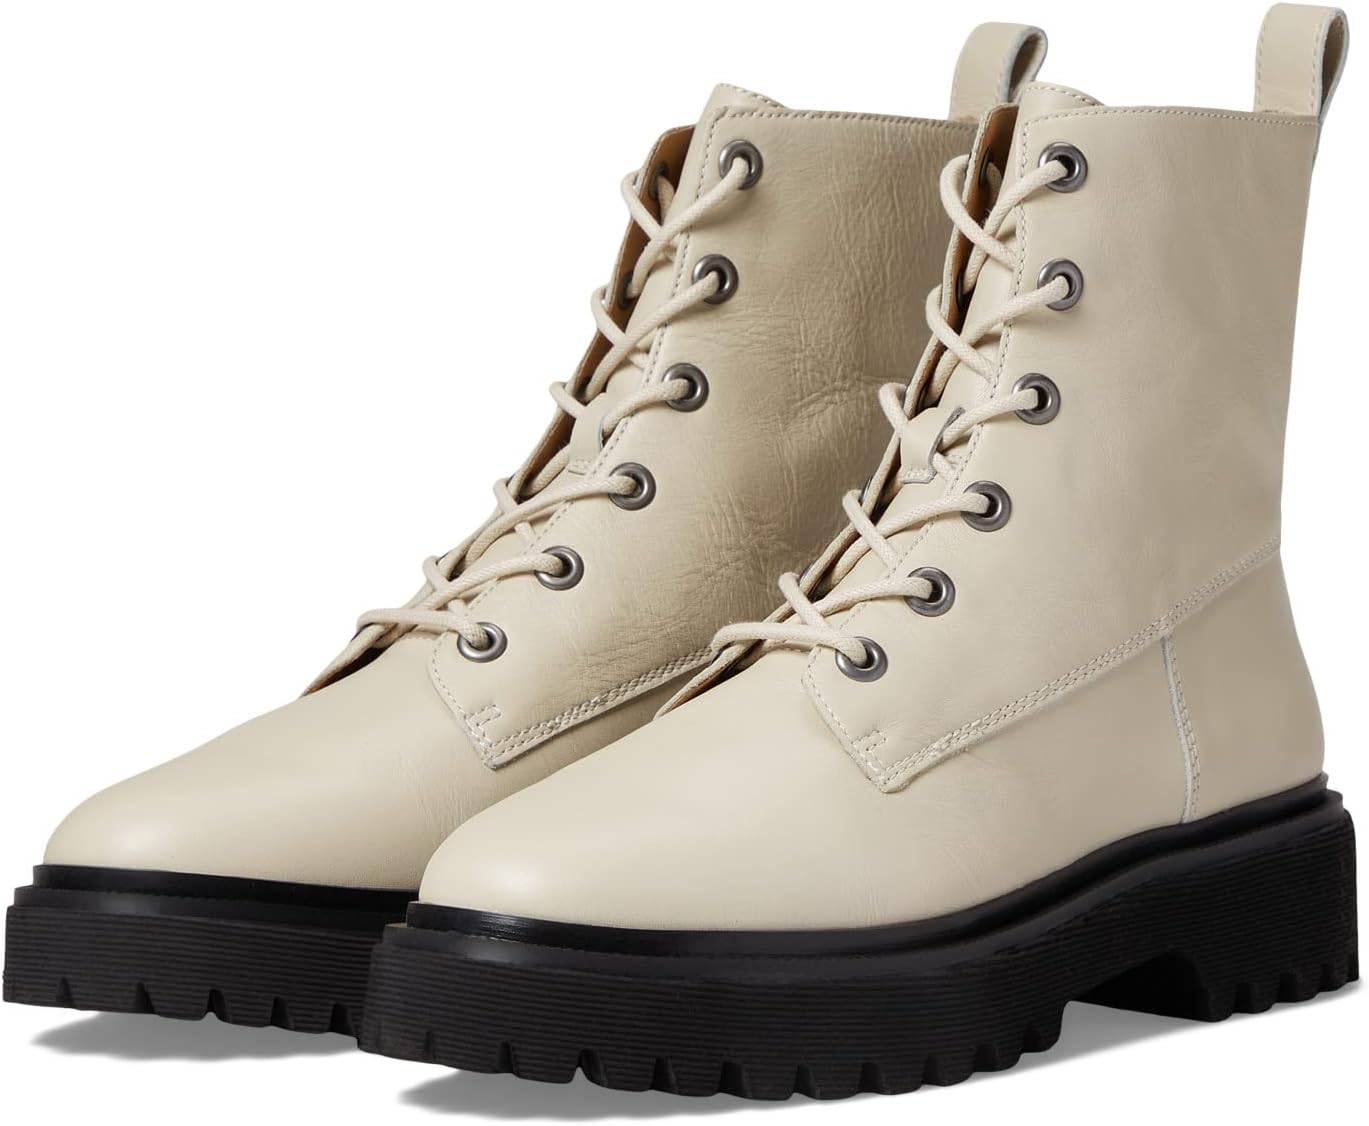 harvest moon ps4 Ботинки на шнуровке The Rayna Lace-Up Boot in Leather Madewell, цвет Harvest Moon